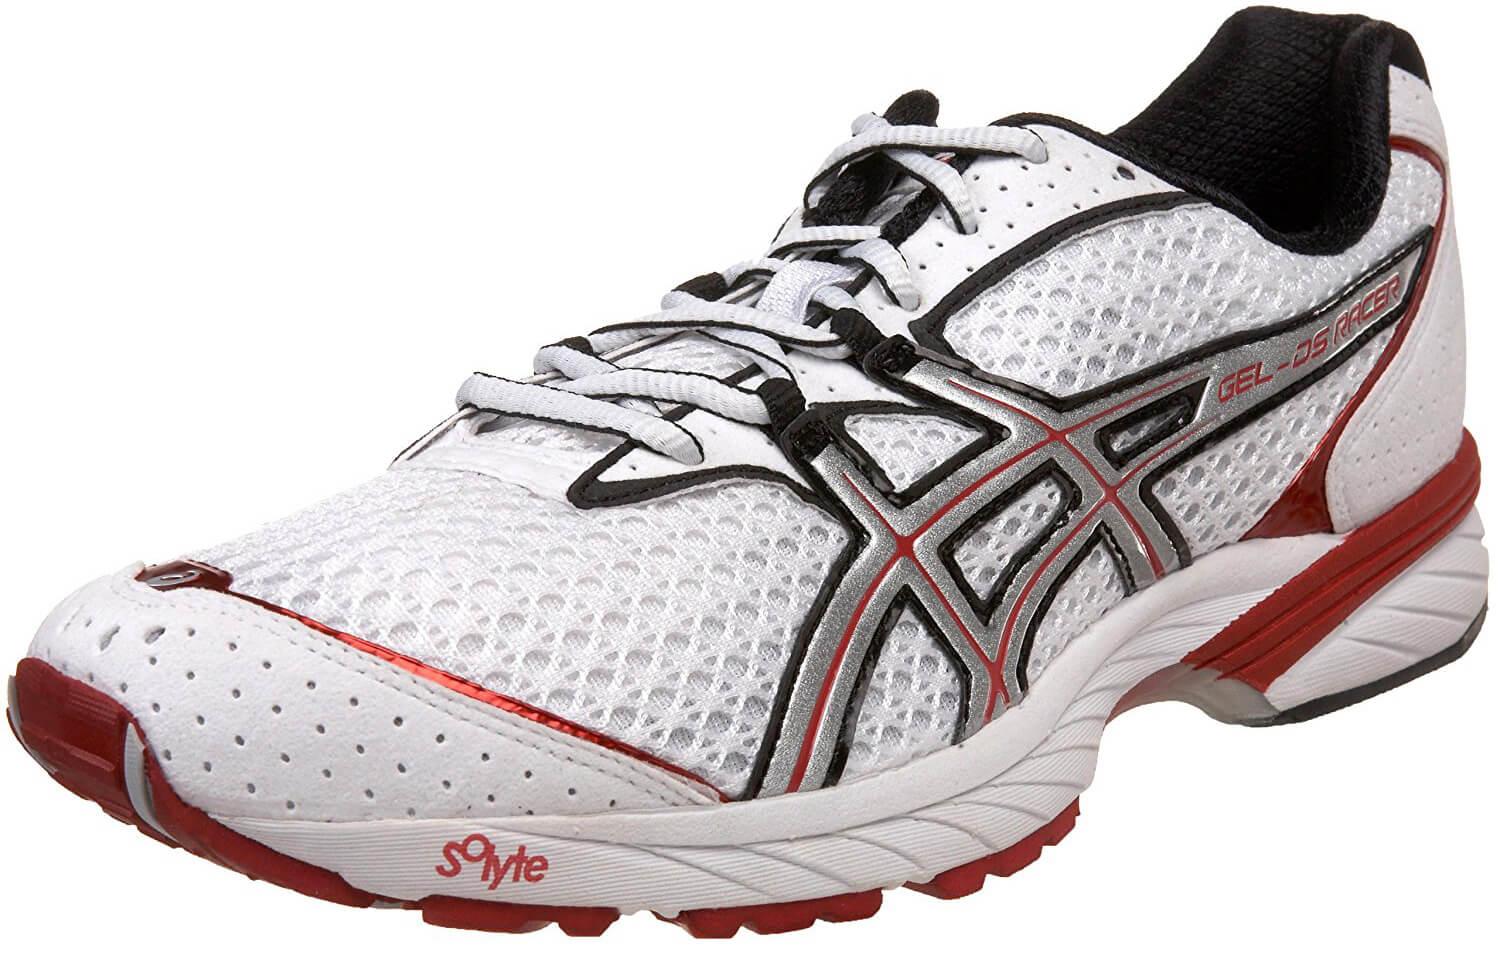 asics running shoes size guide